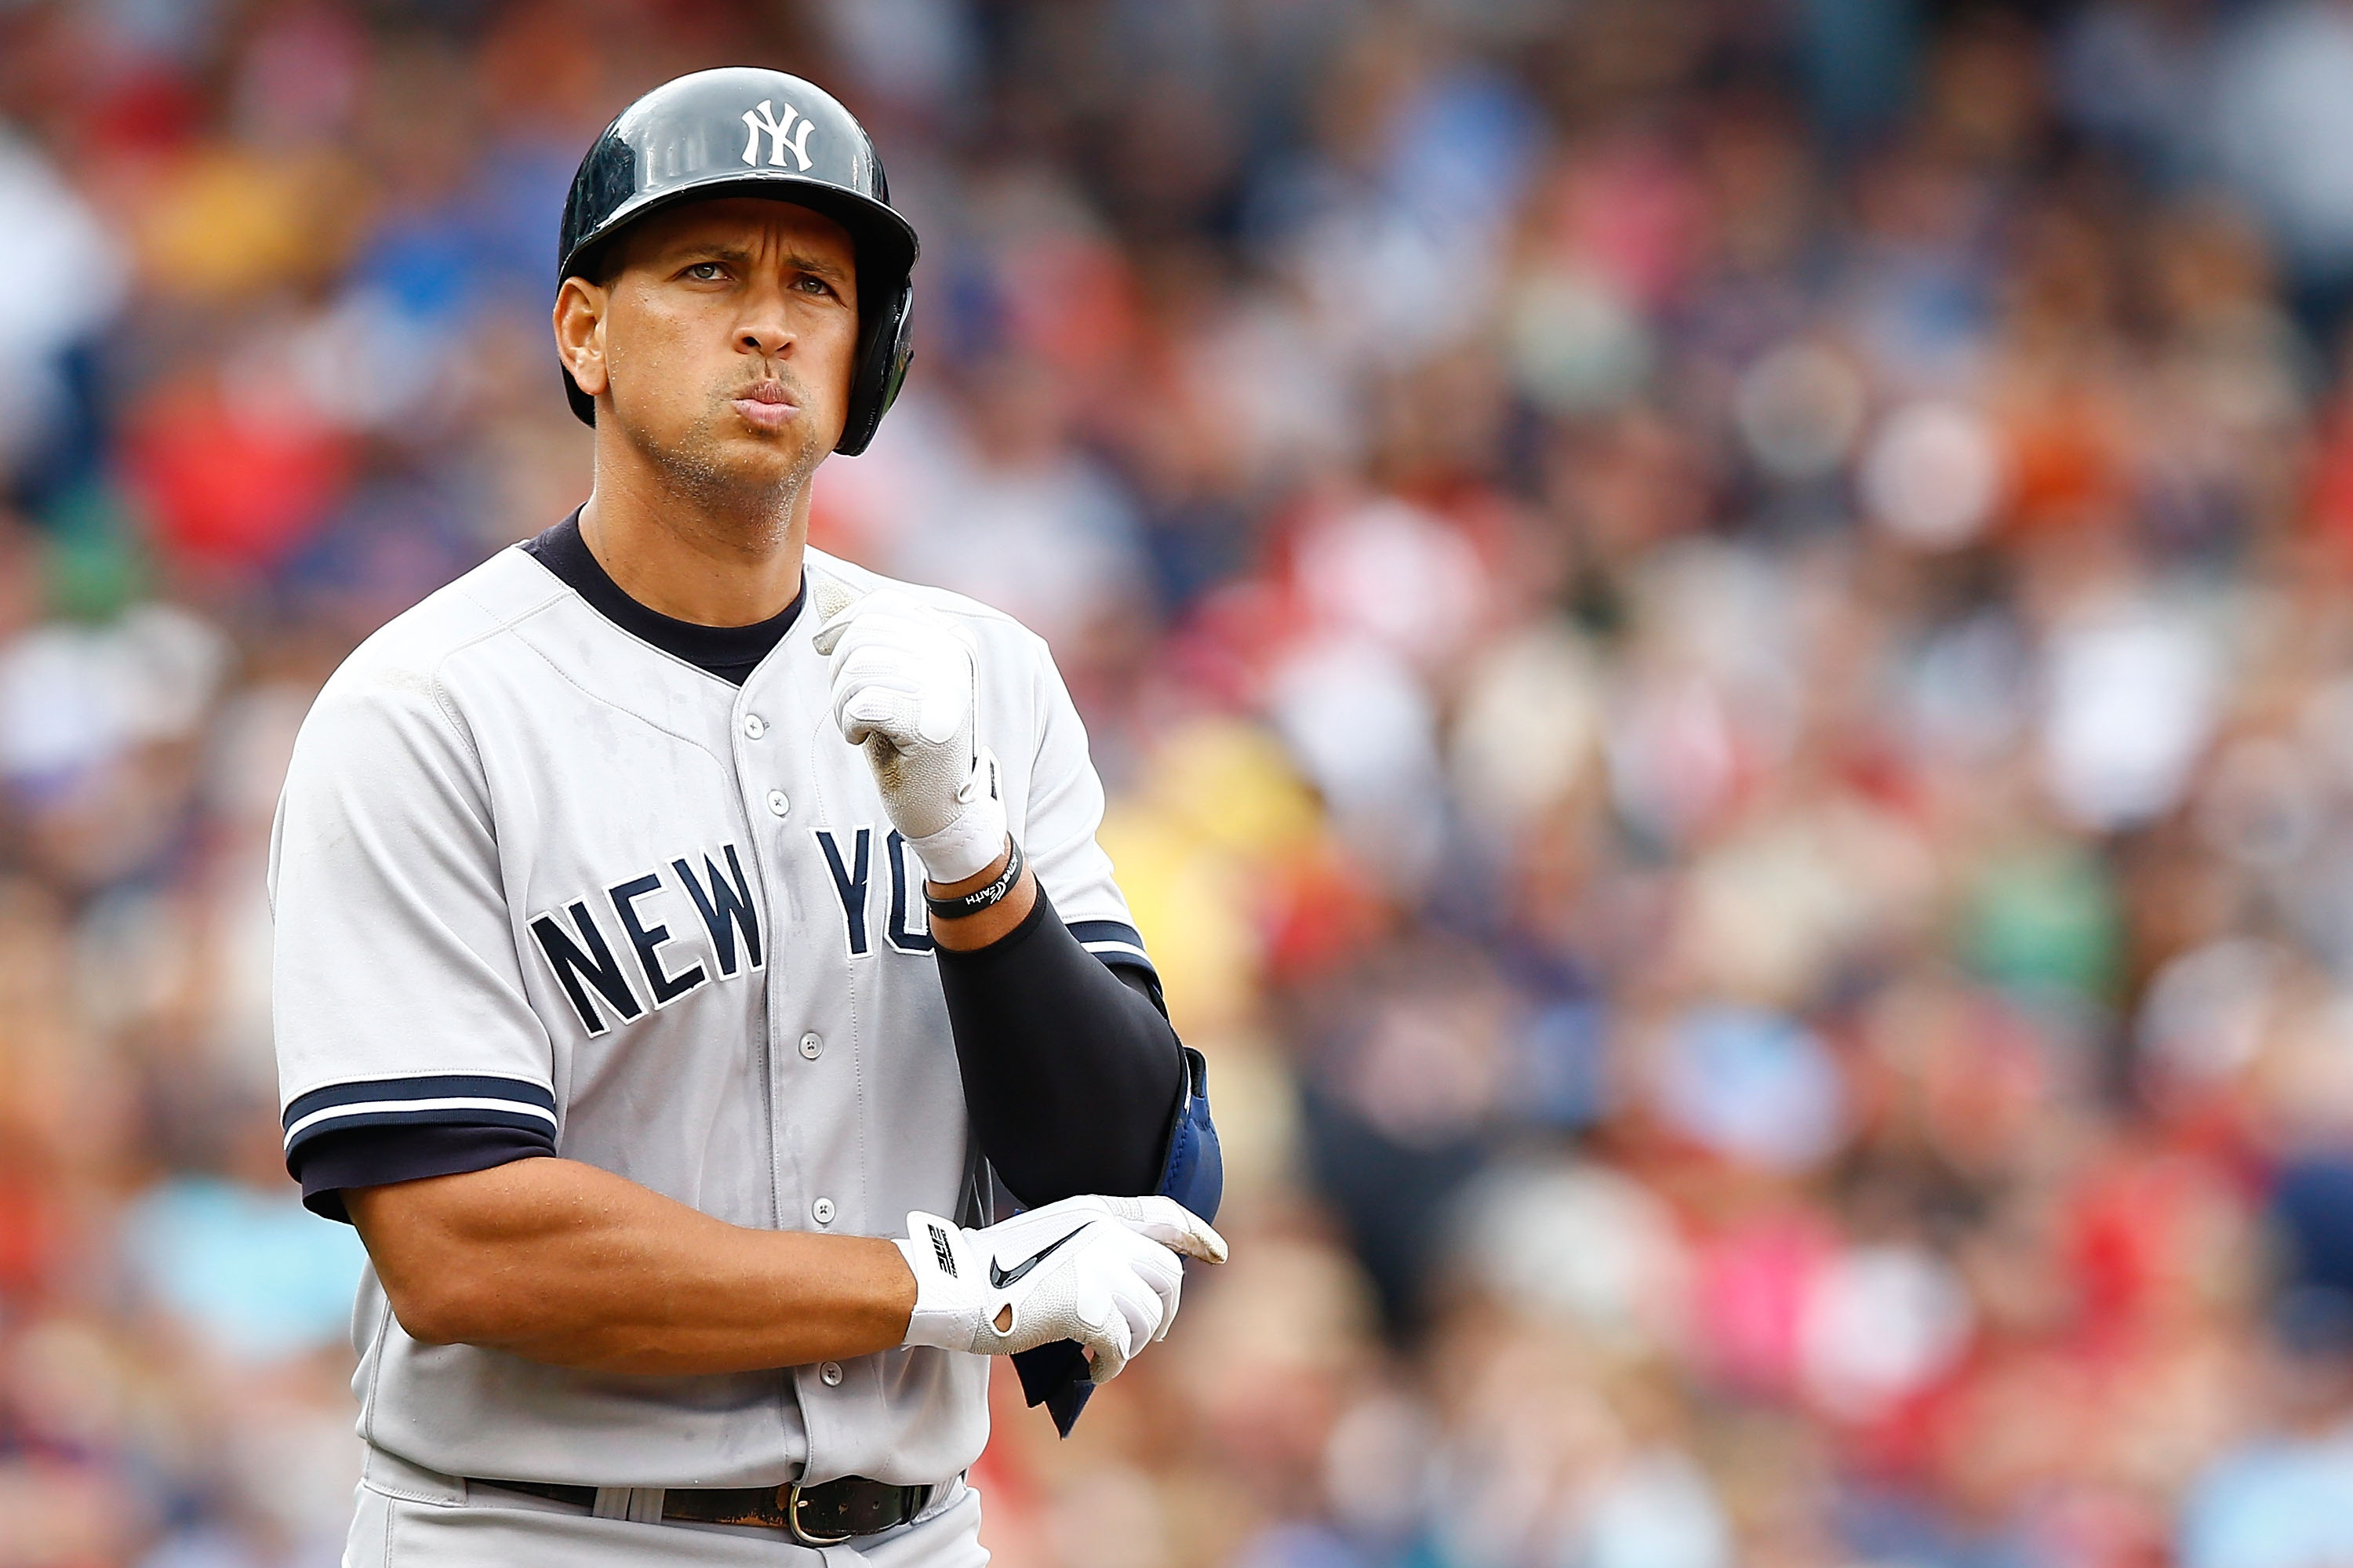 Seattle Mariner Alex Rodriguez signs with Texas Rangers for $252